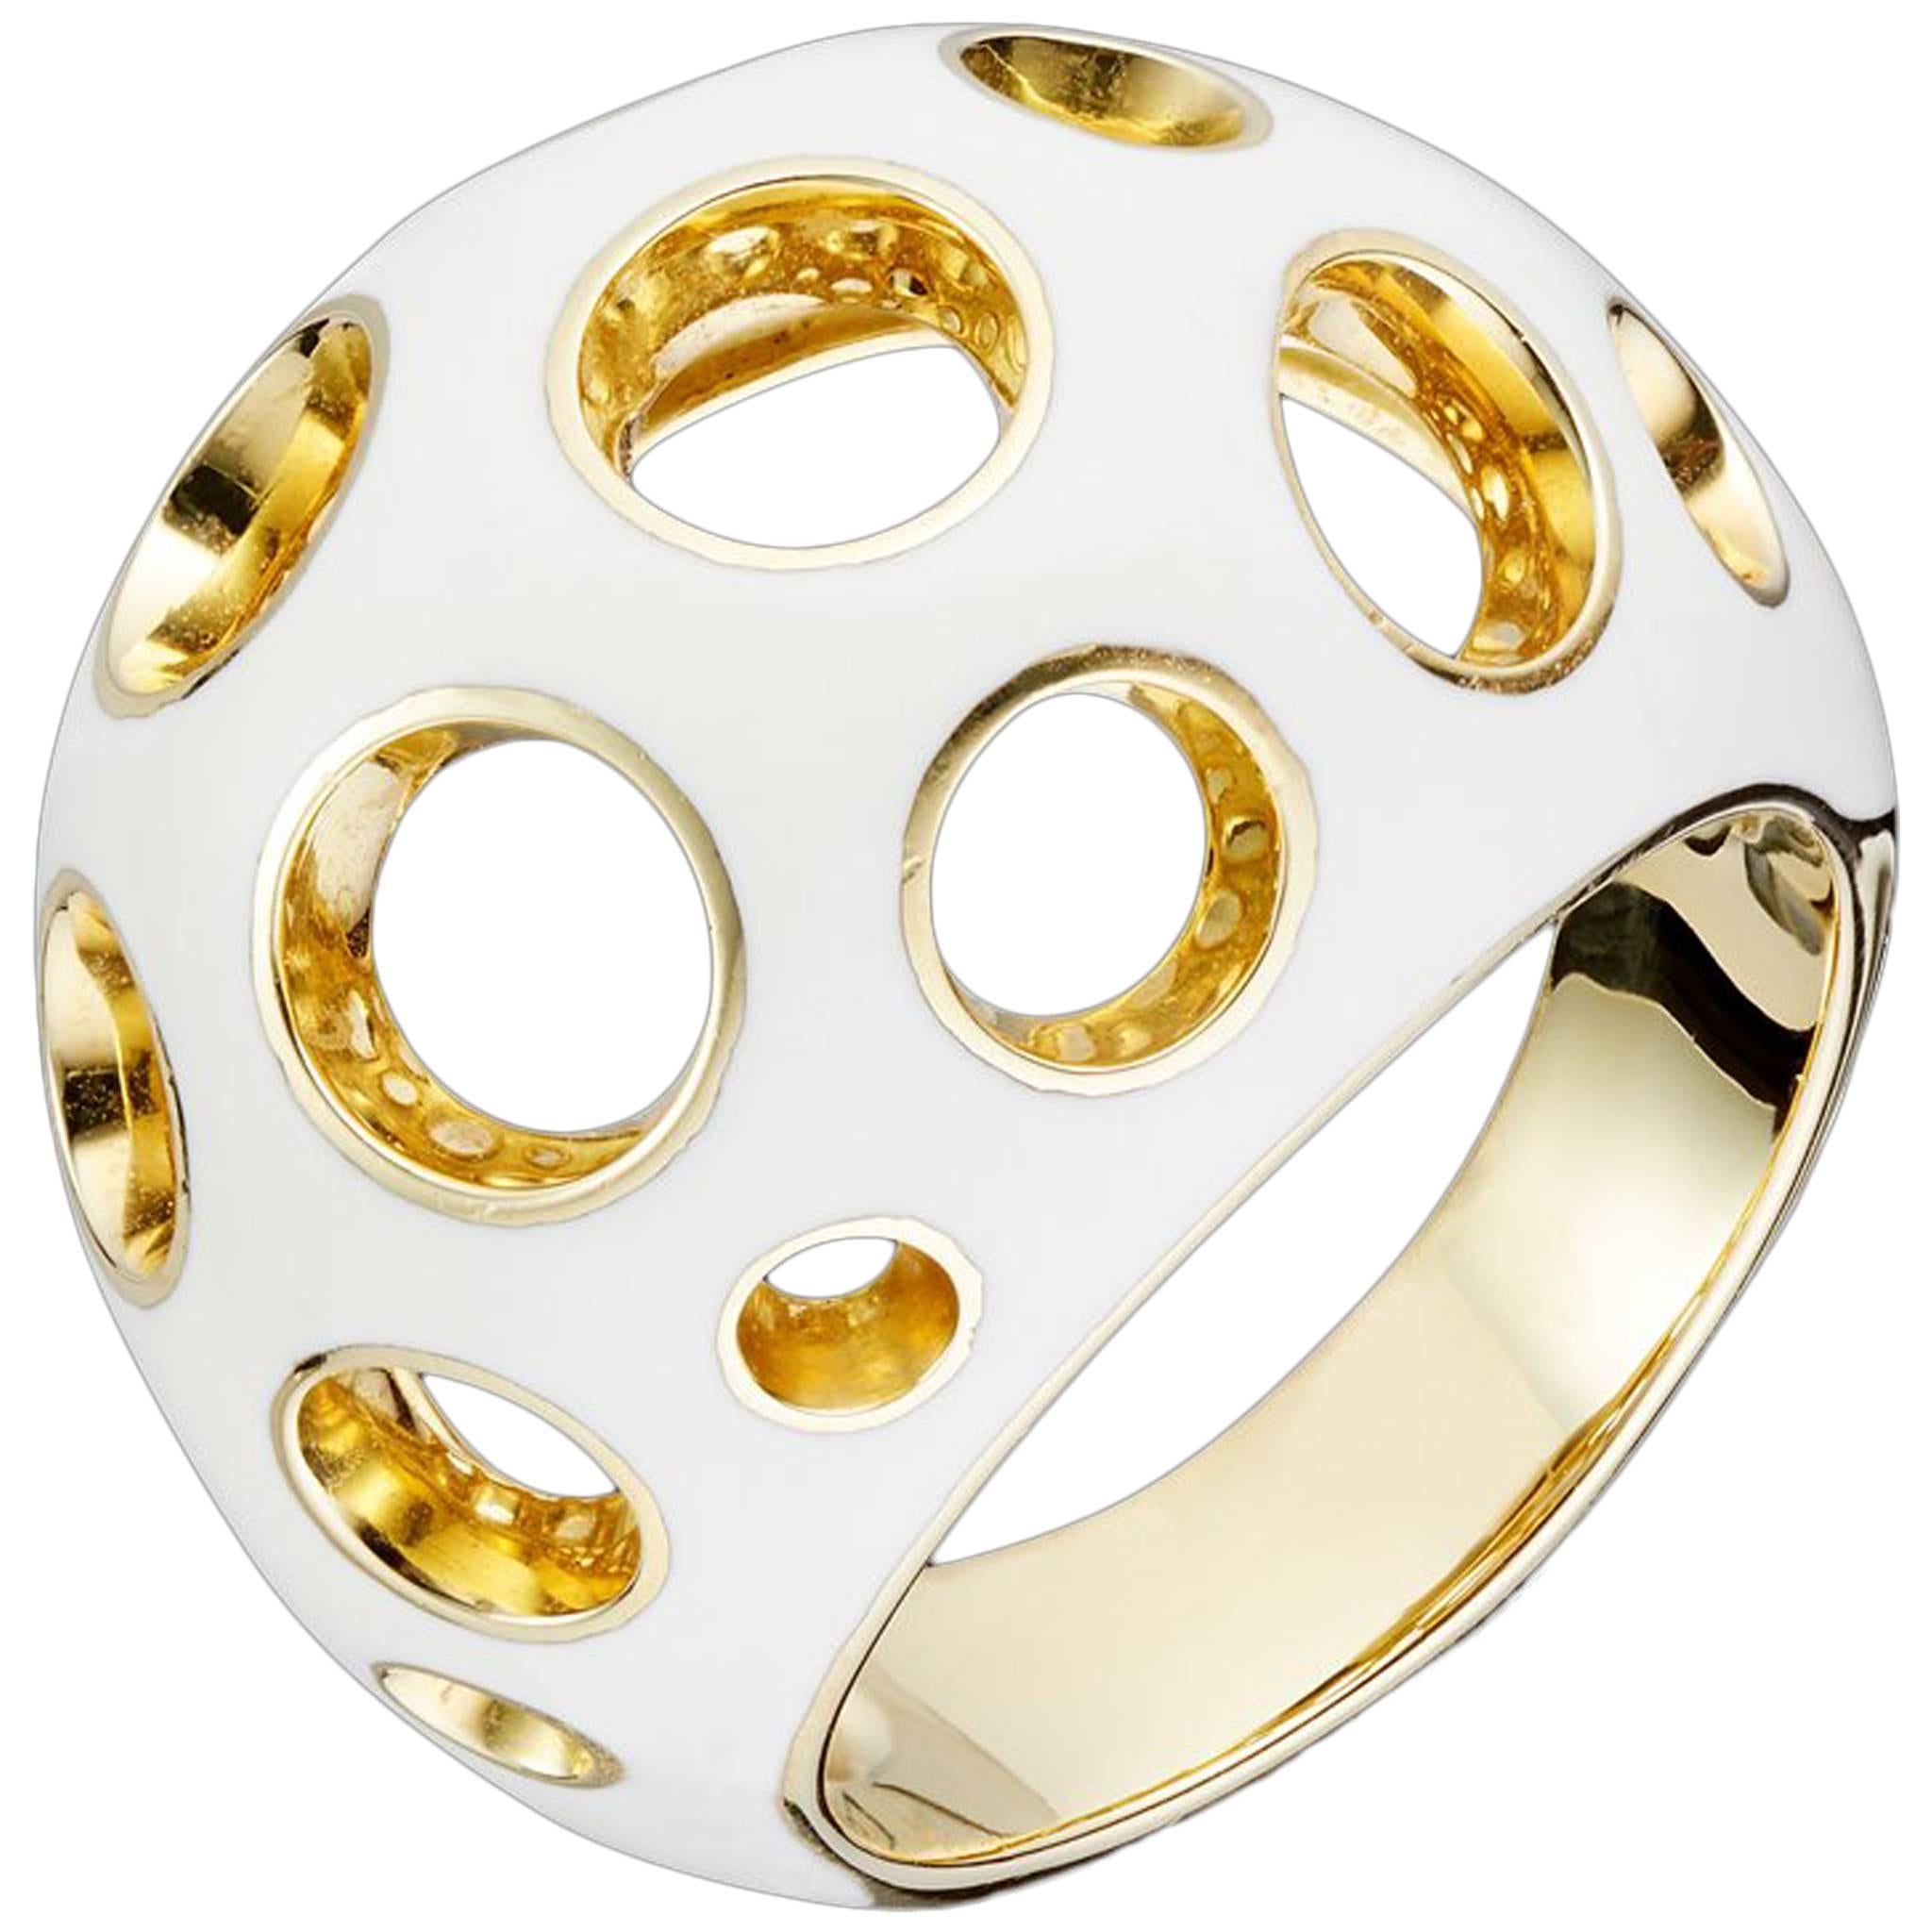 Mellerio "Dits Meller" Iconic Ring White Enamel and 18 Carat Yellow Gold For Sale